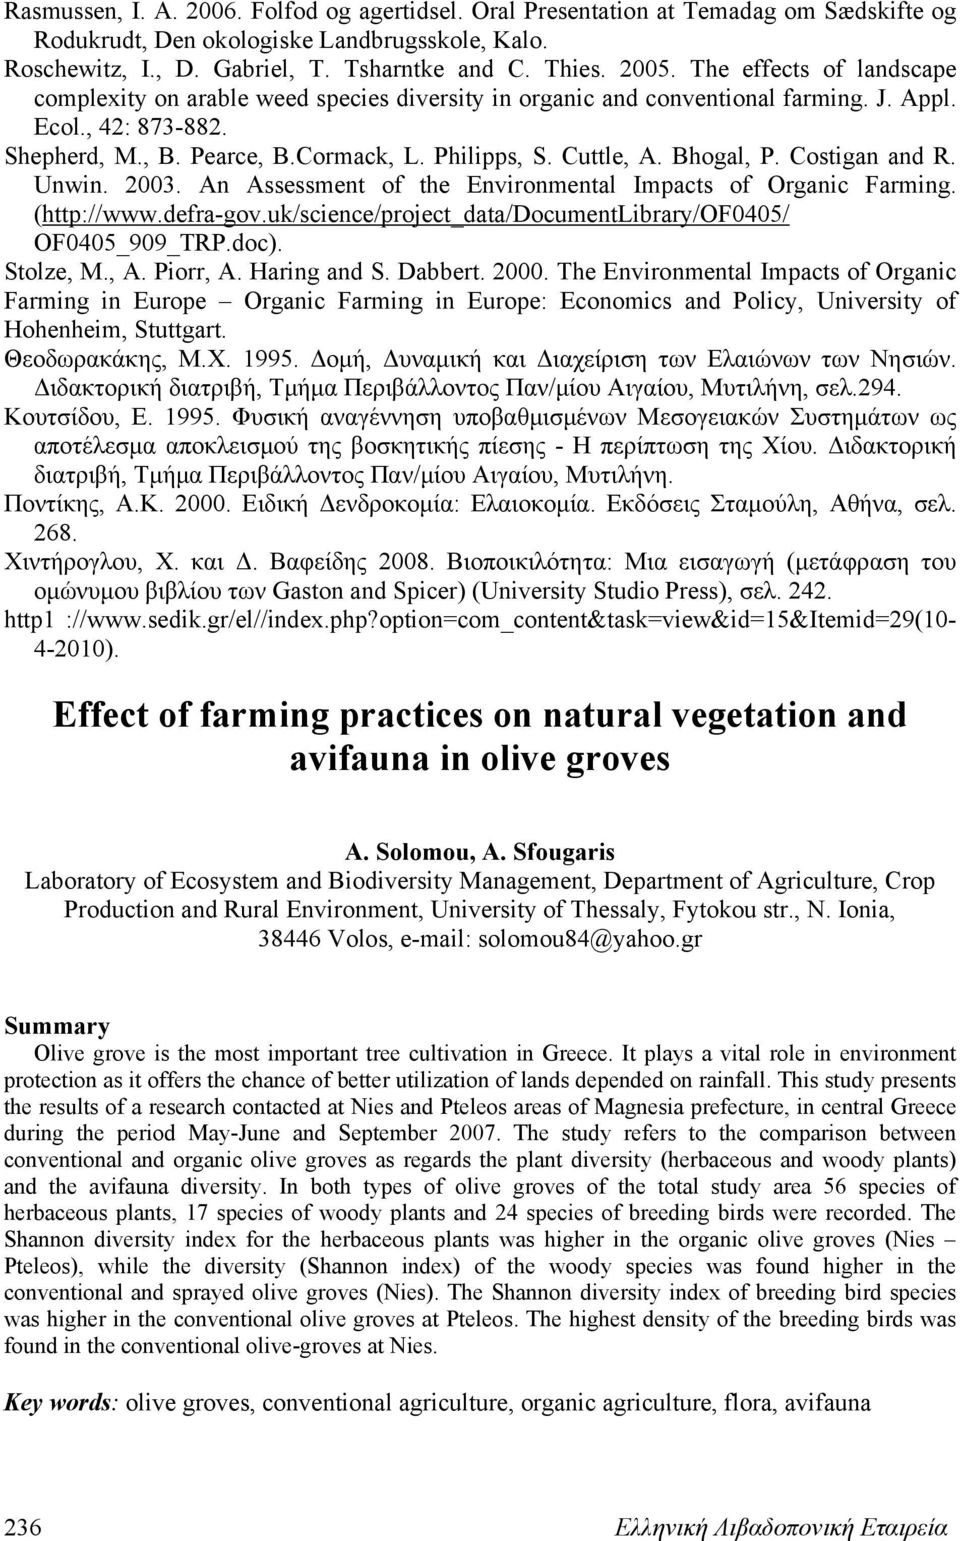 Bhogal, P. Costigan and R. Unwin. 2003. An Assessment of the Environmental Impacts of Organic Farming. (http://www.defra-gov.uk/science/project_data/documentlibrary/of0405/ OF0405_909_TRP.doc).